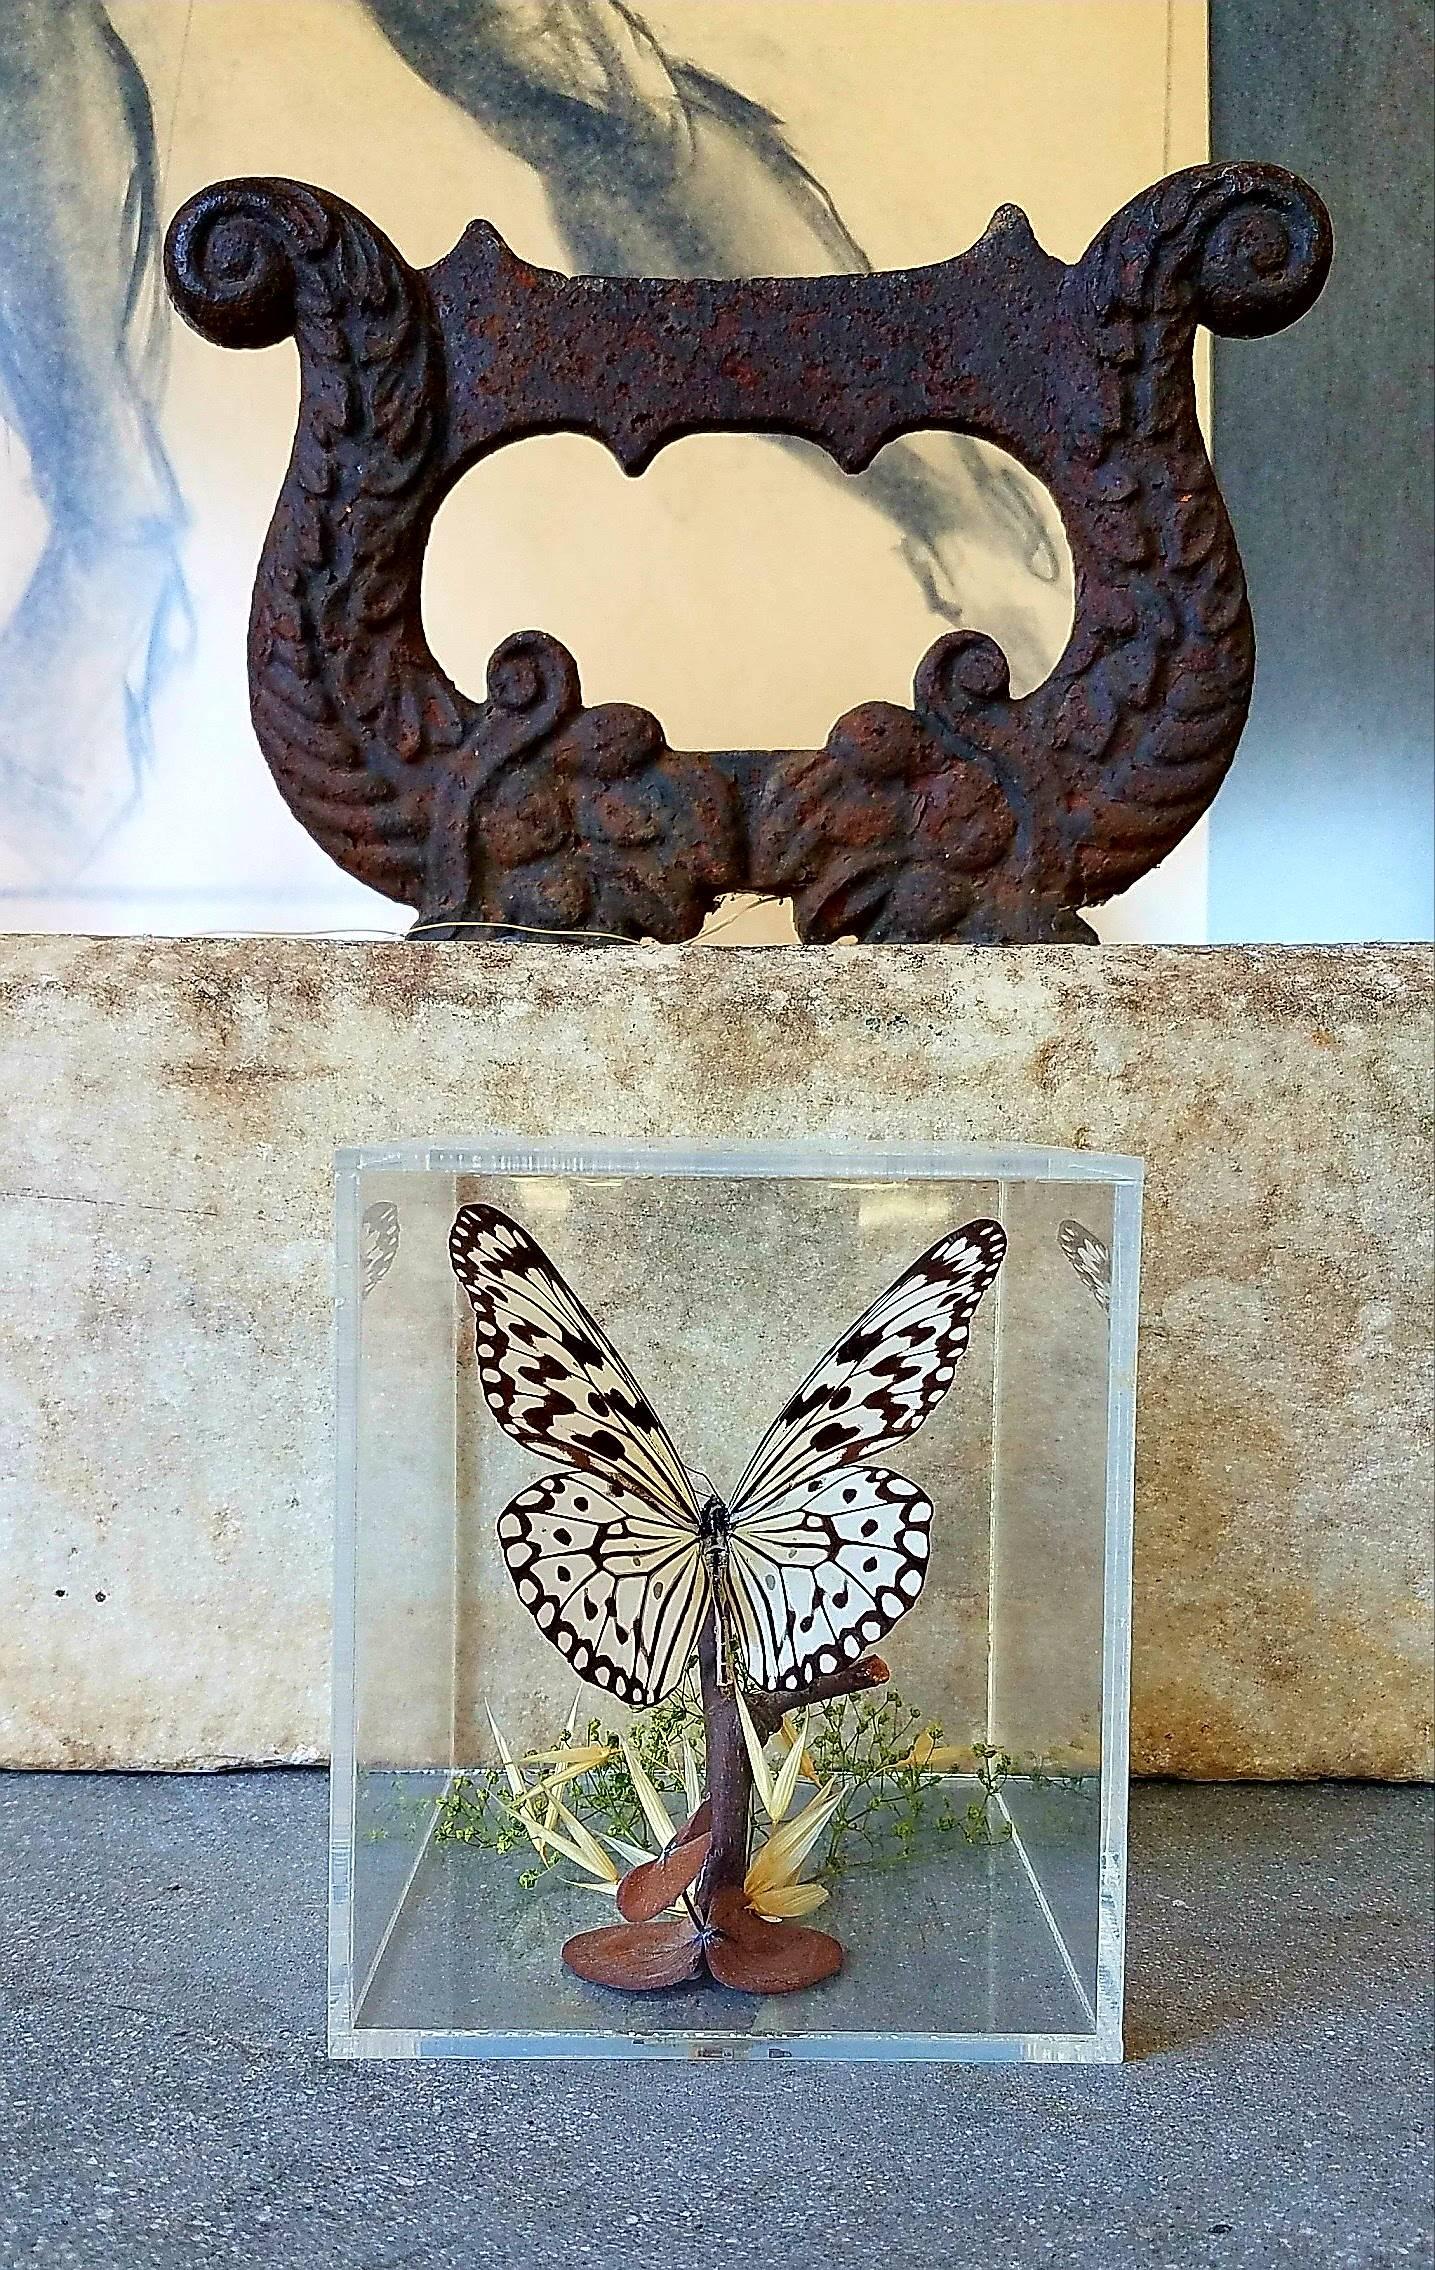 This striped butterfly is in excellent condition as is the Lucite display case.